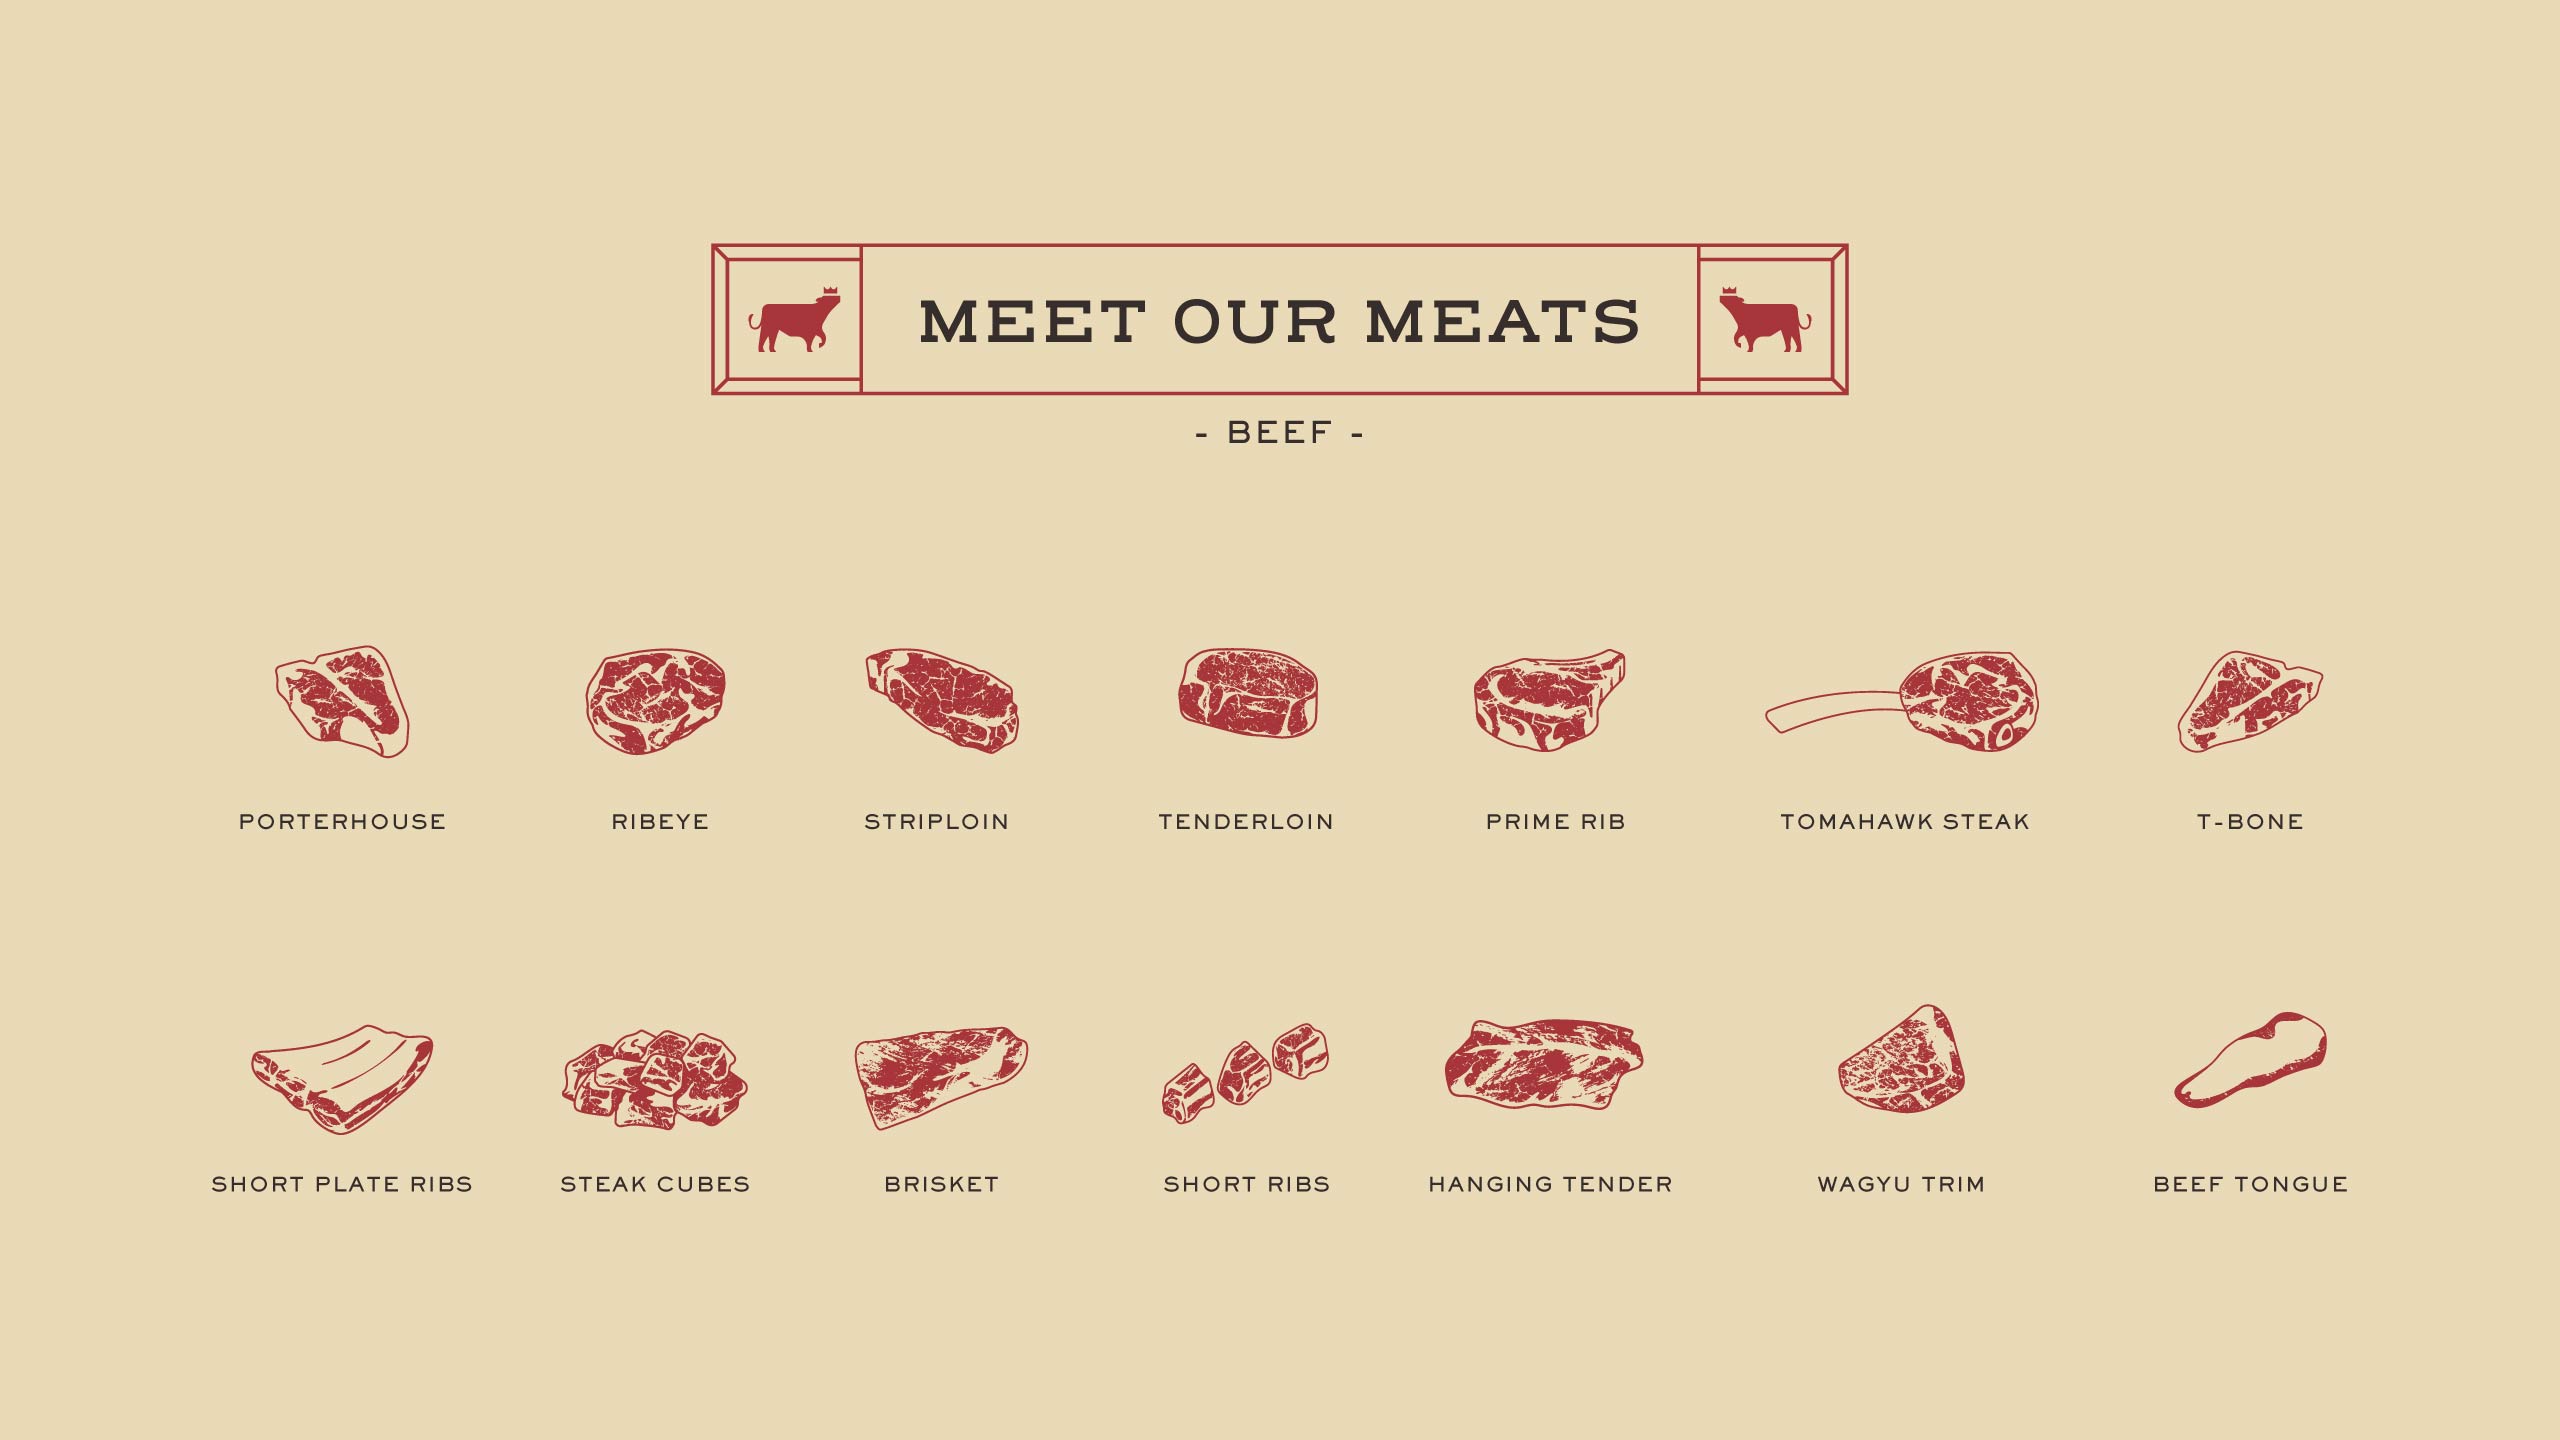 Icons, illustrations, and branding for Filipino meat brand Primebeef showing different cuts of meat